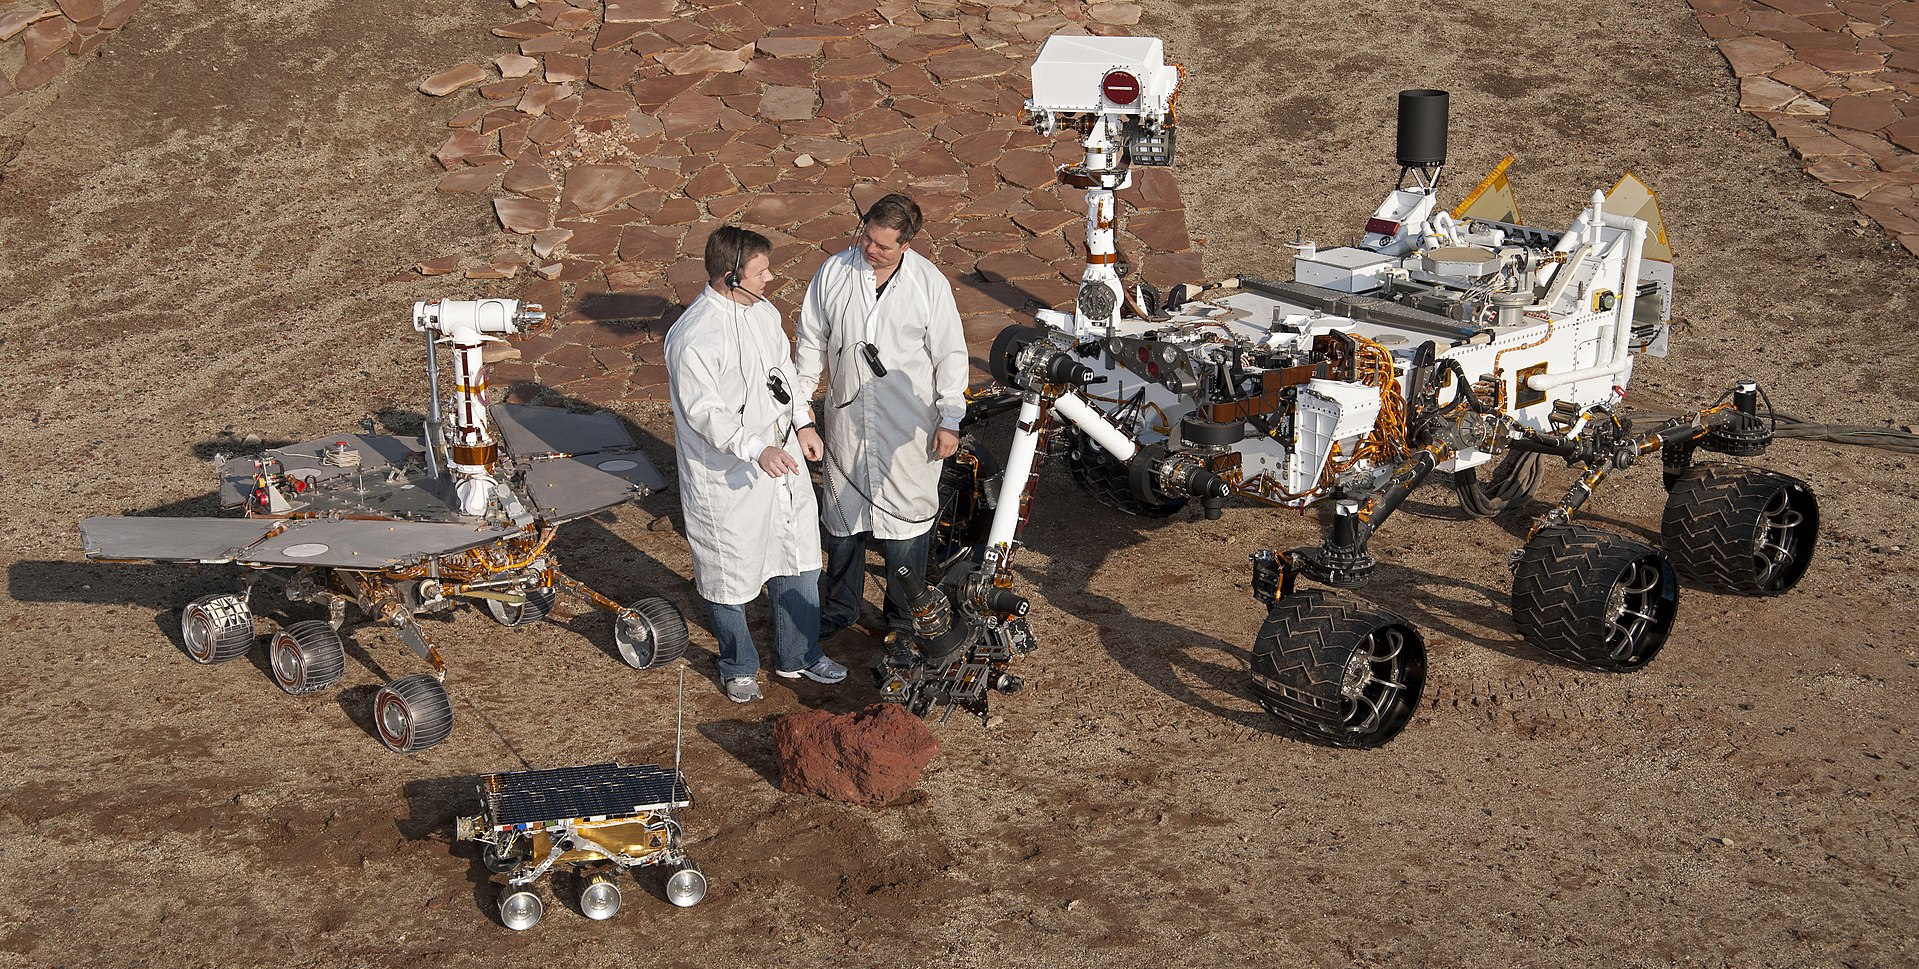 1920px-pia15279_3rovers-stand_d2011_1215_d521.jpg